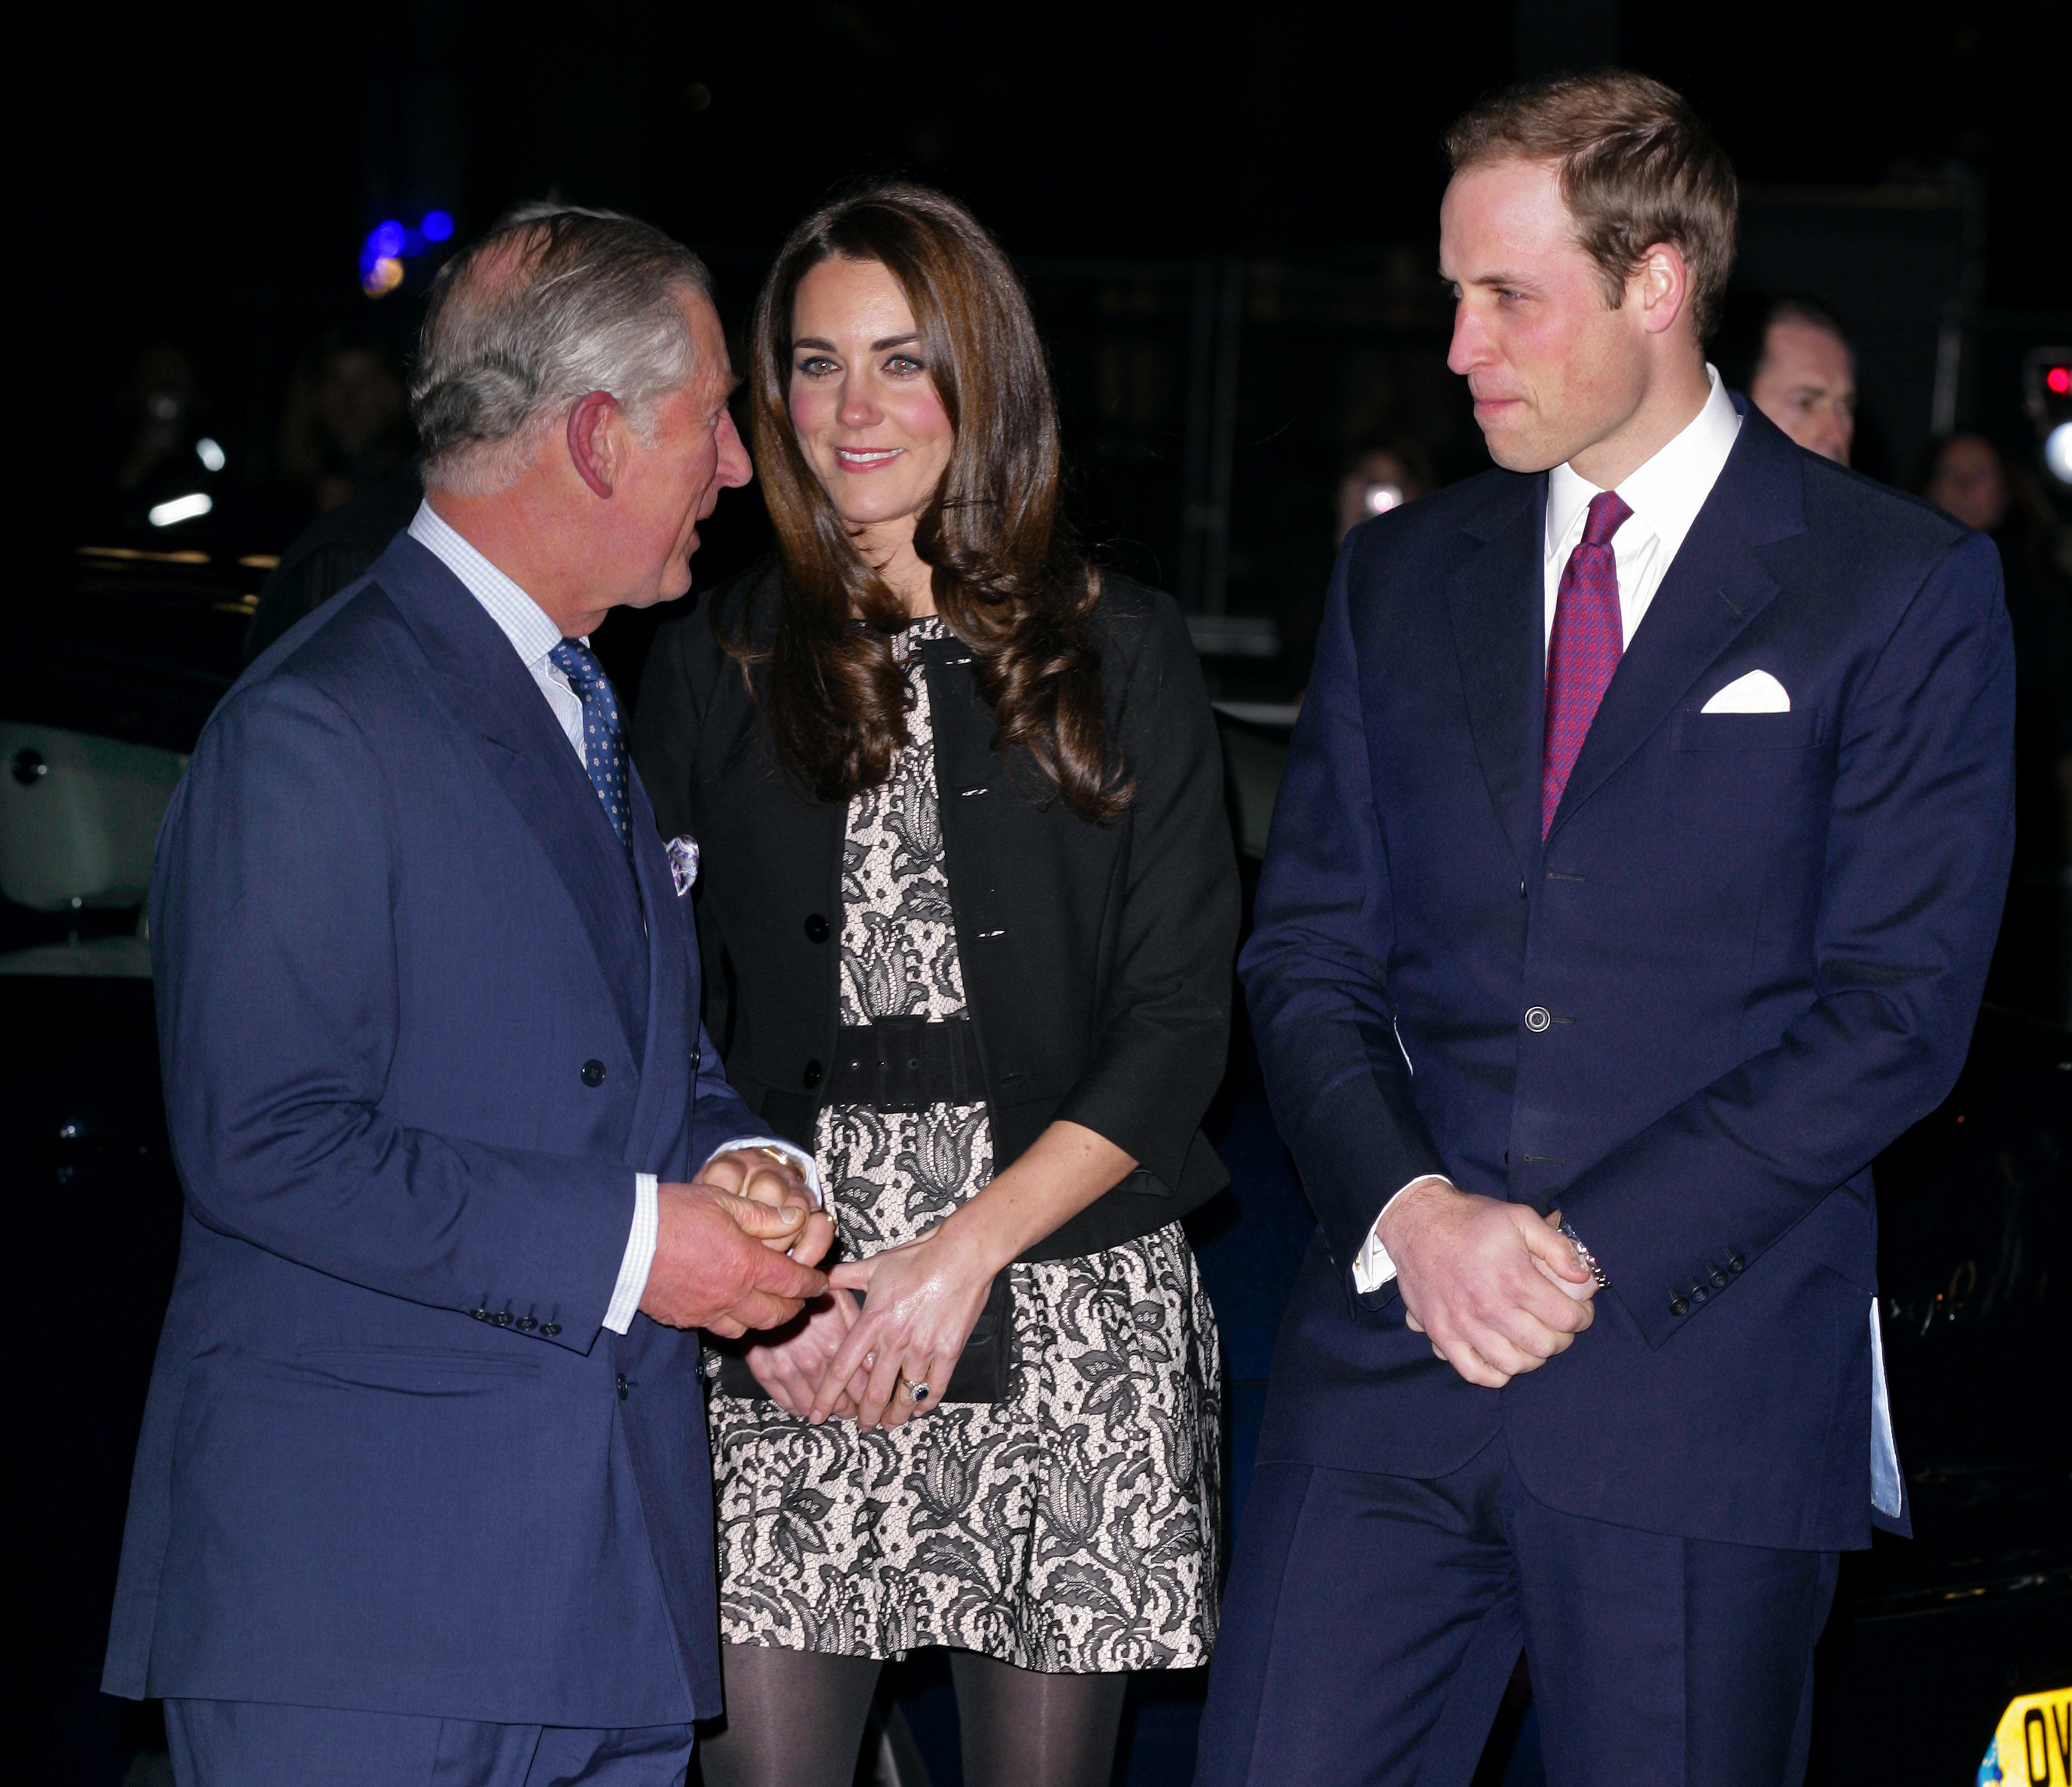 King Charles, Princess Catherine and Prince William during a Gary Barlow concert in support of The Prince's Trust and The Foundation of Prince William and Prince Harry at Royal Albert Hall on December 6, 2011 in London, England. | Source: Getty Images